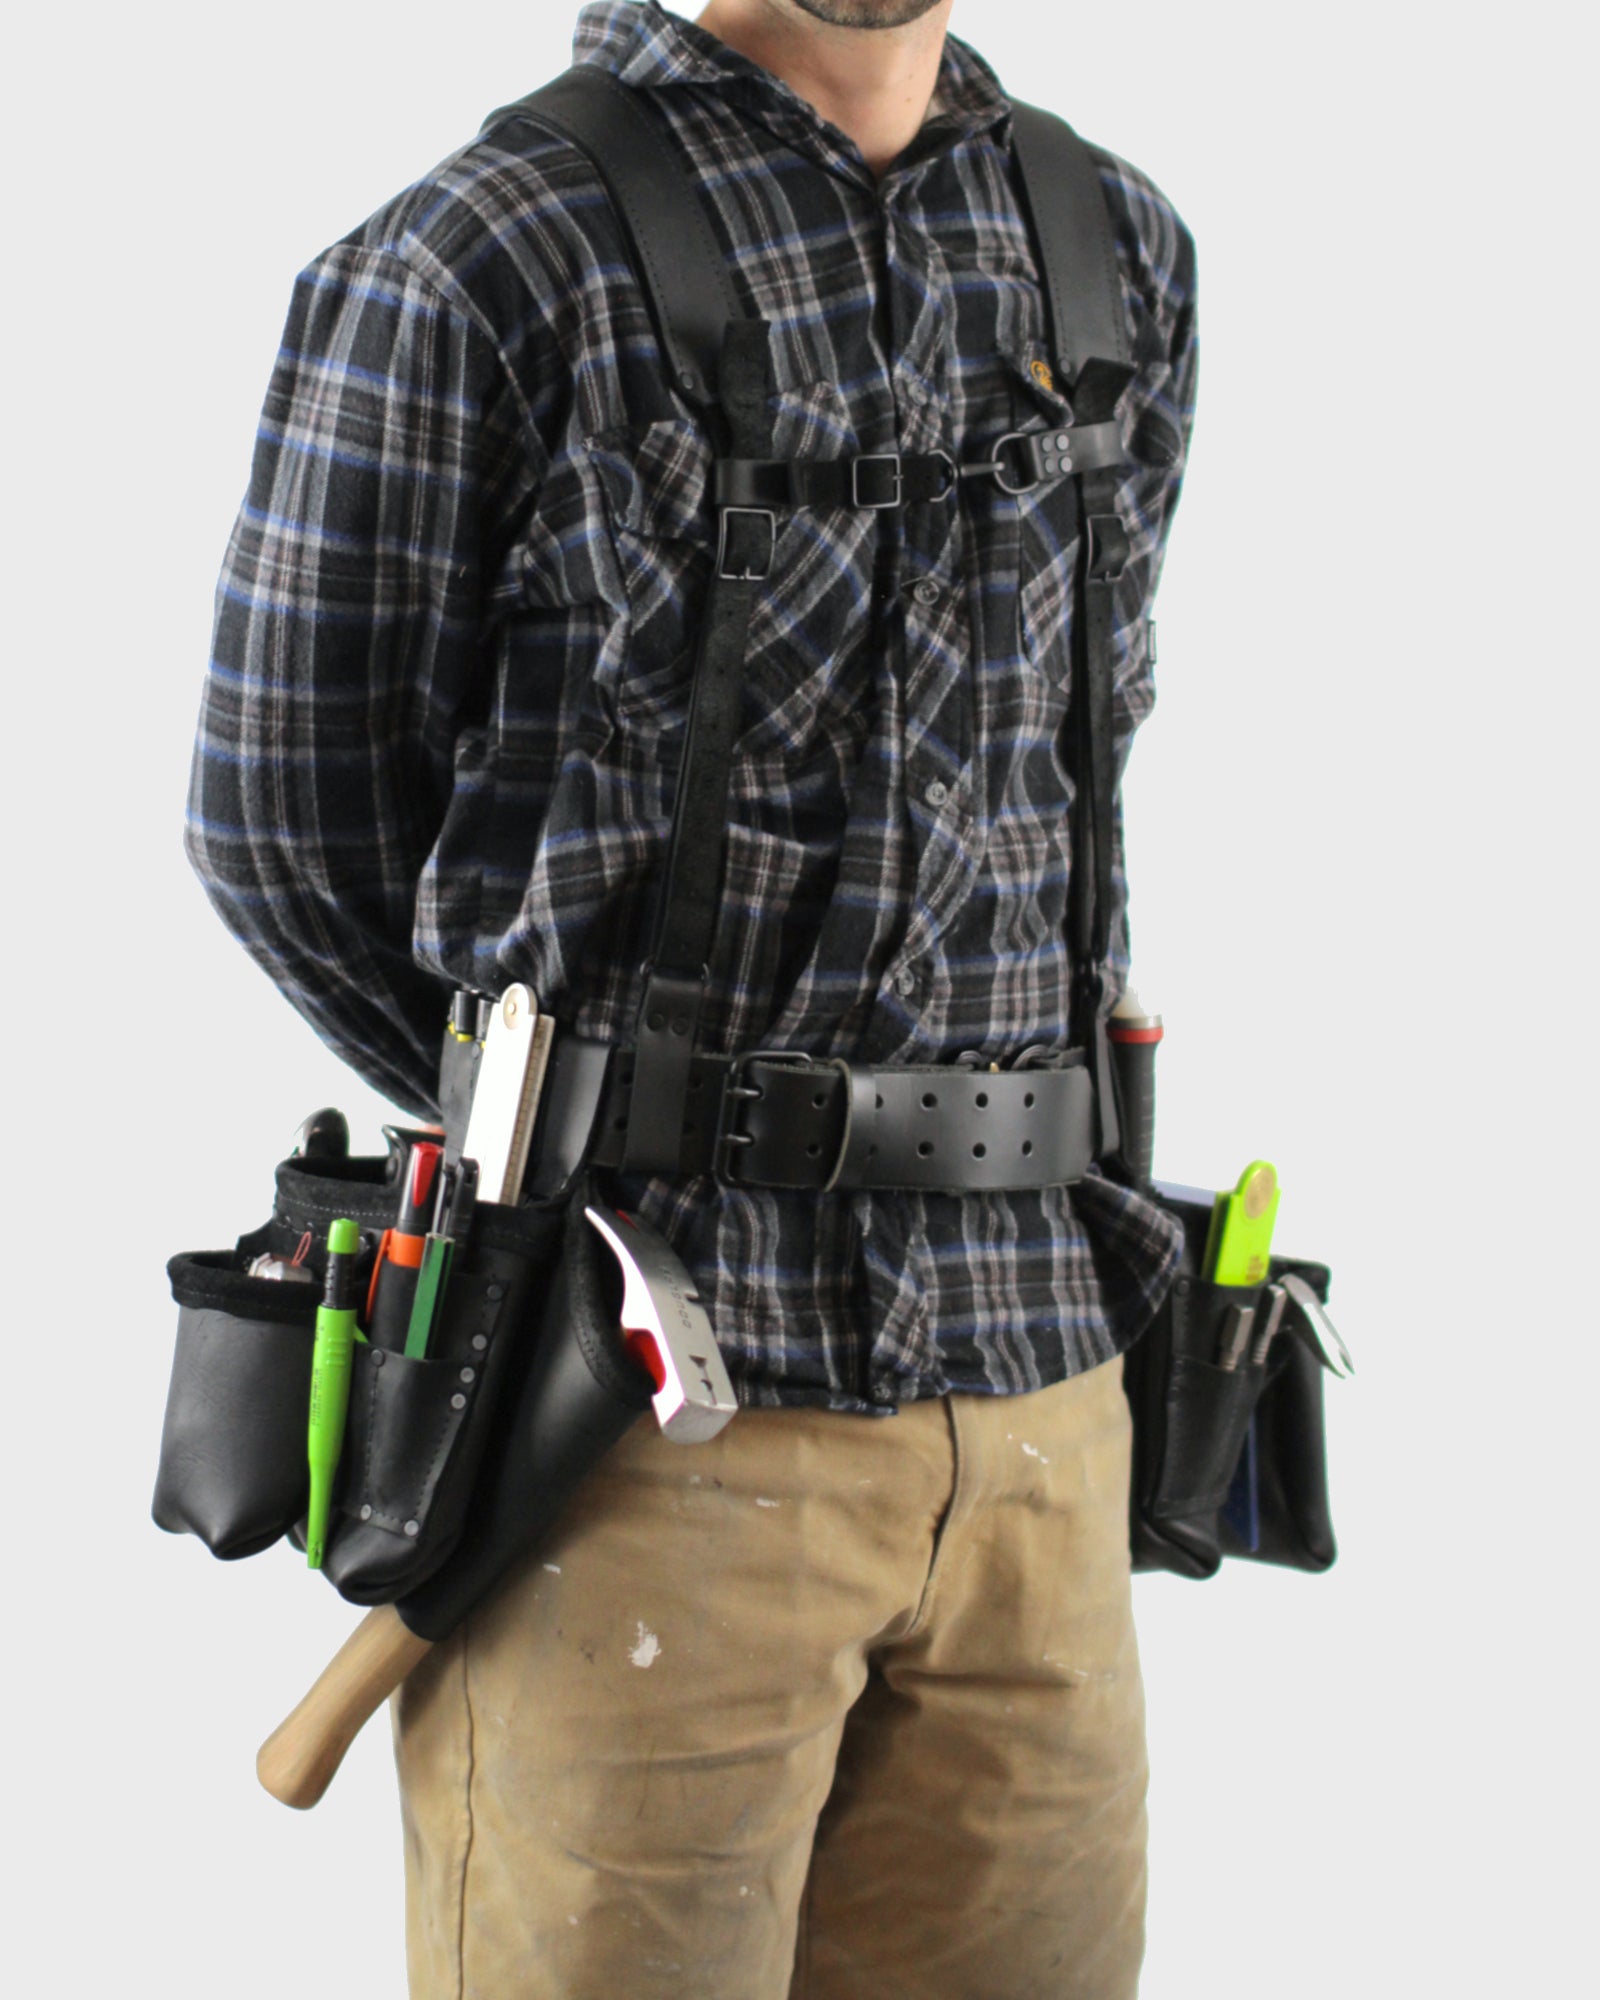 Hammer Pouch Katipo Tool Belts